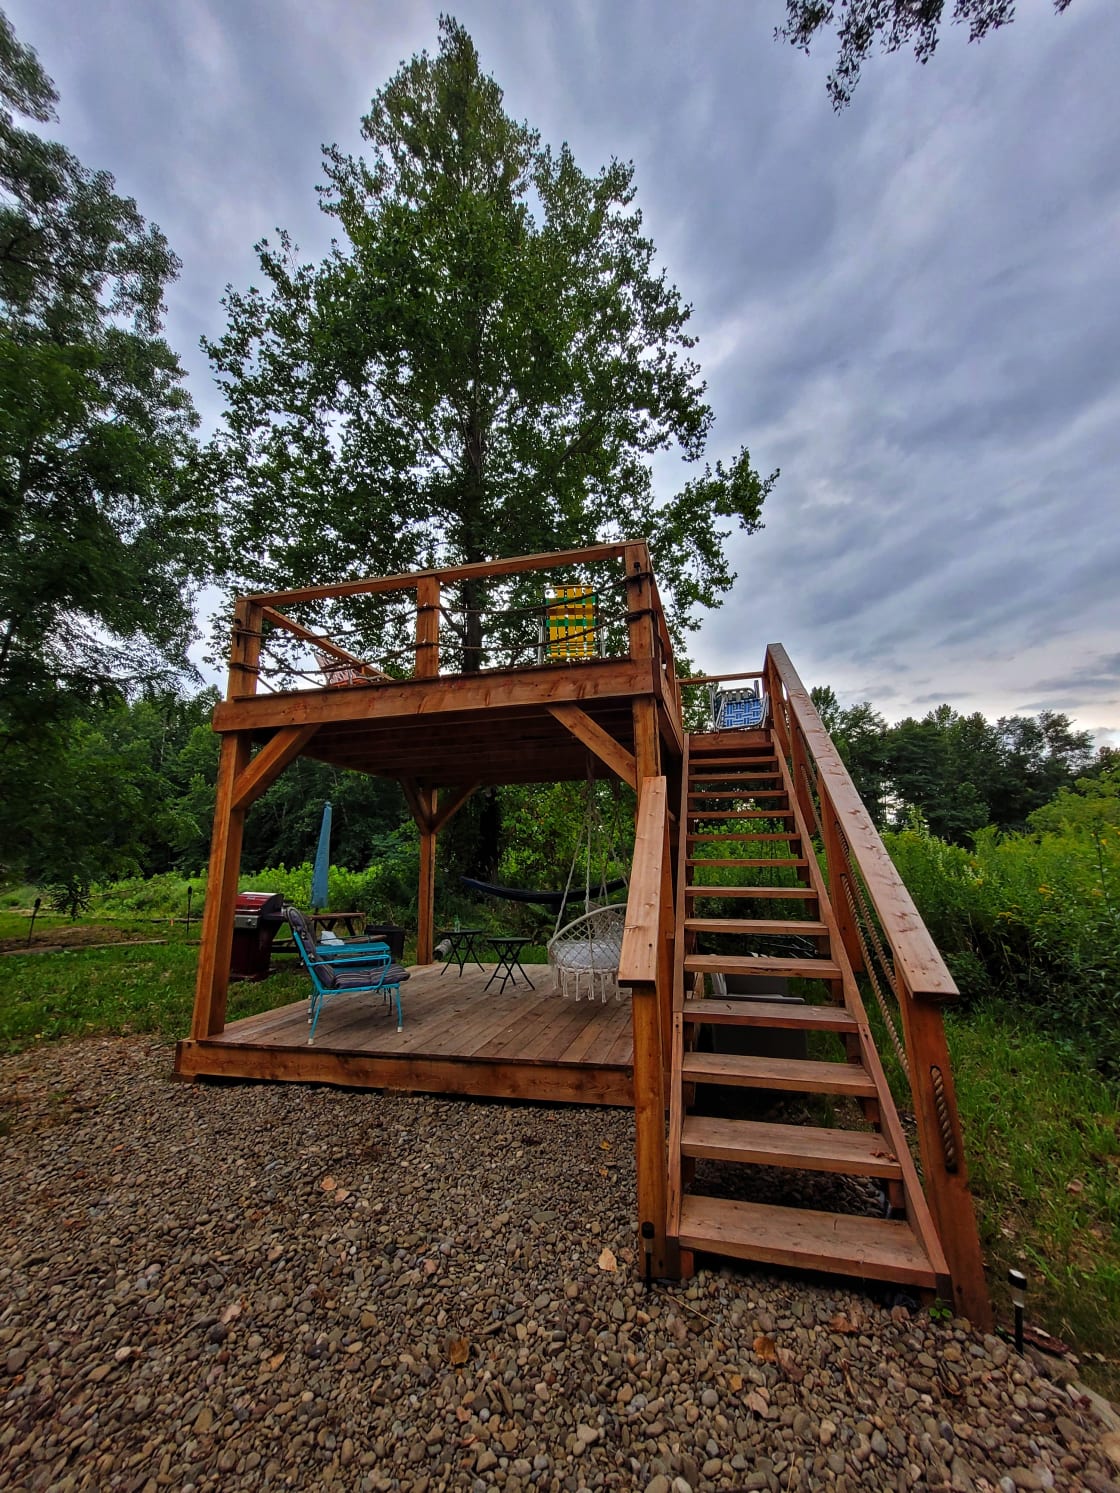 Bring your tent to the top level for a treehouse feel!